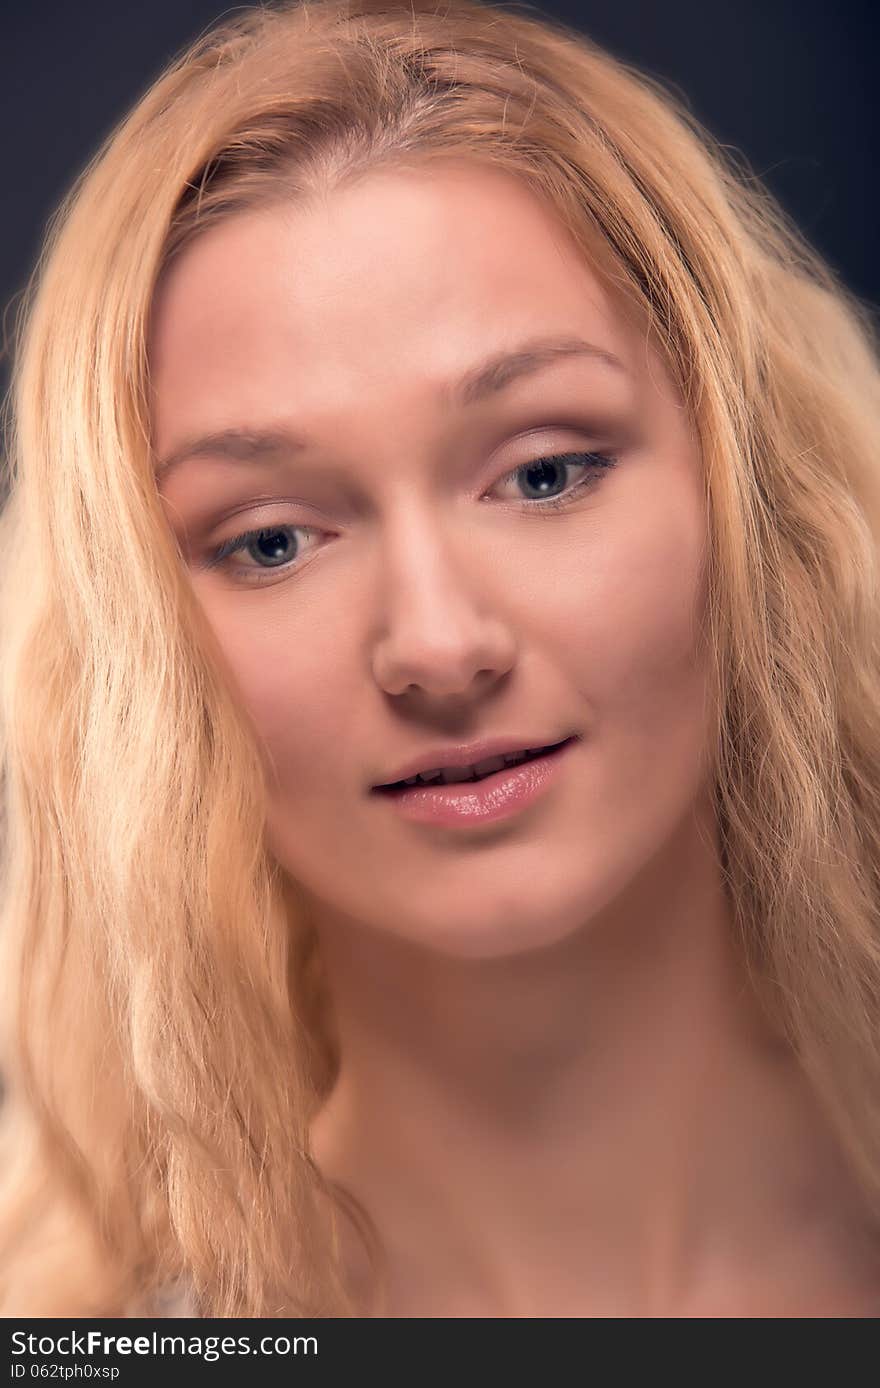 Close up portrait of natural looking young woman with healthy facial skin, long golden blond hair, big beautiful eyes. Over dark blue background. Close up portrait of natural looking young woman with healthy facial skin, long golden blond hair, big beautiful eyes. Over dark blue background.